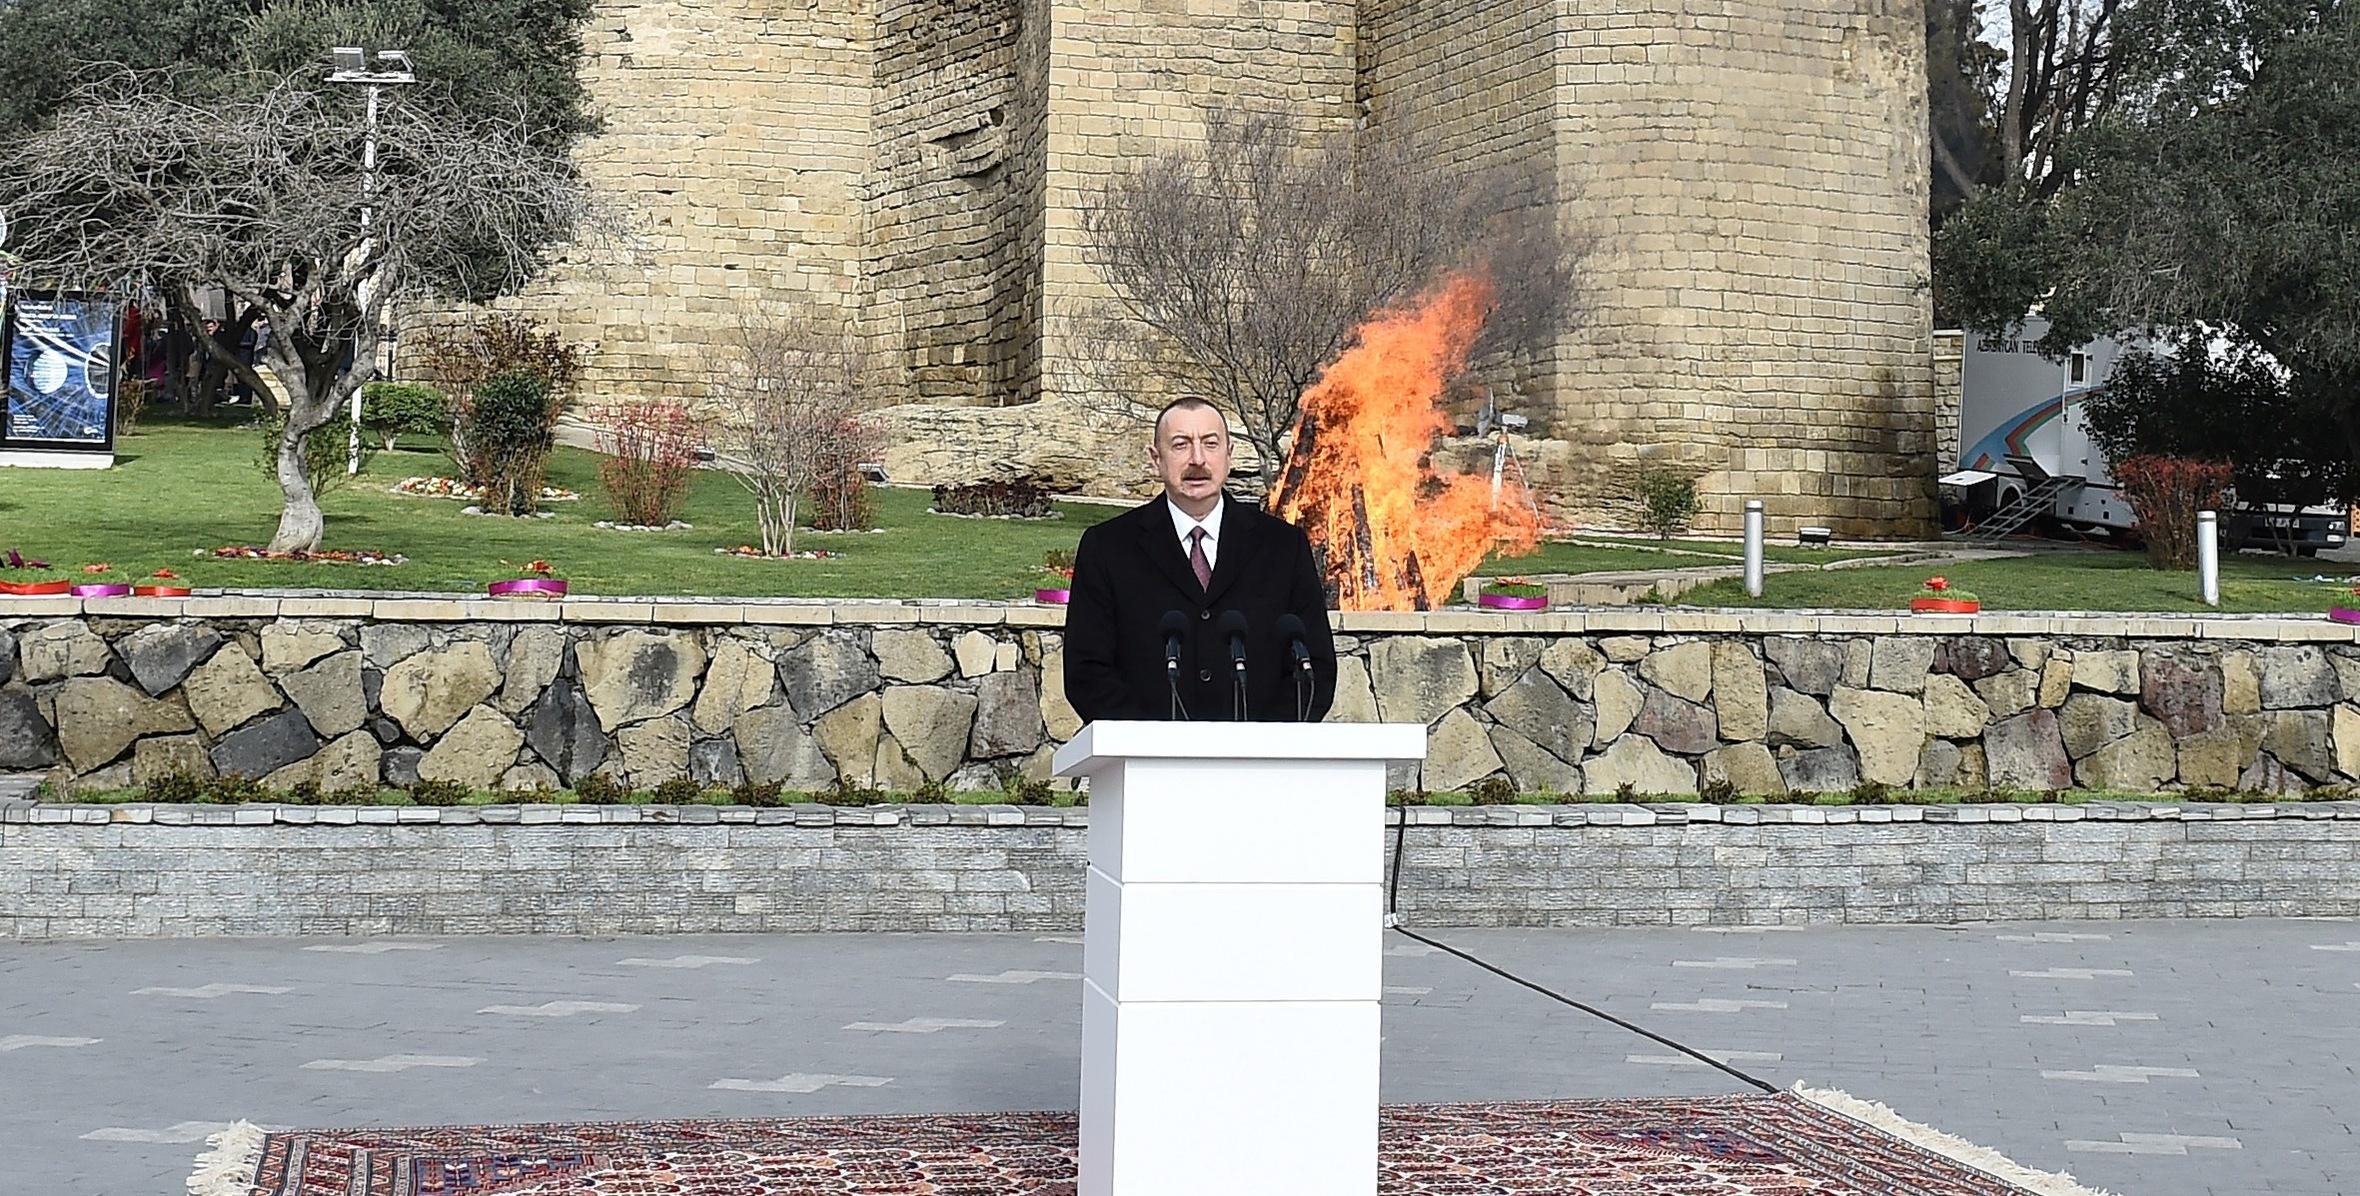 Speech by Ilham Aliyev at the nationwide festivities on the occasion of Novruz holiday